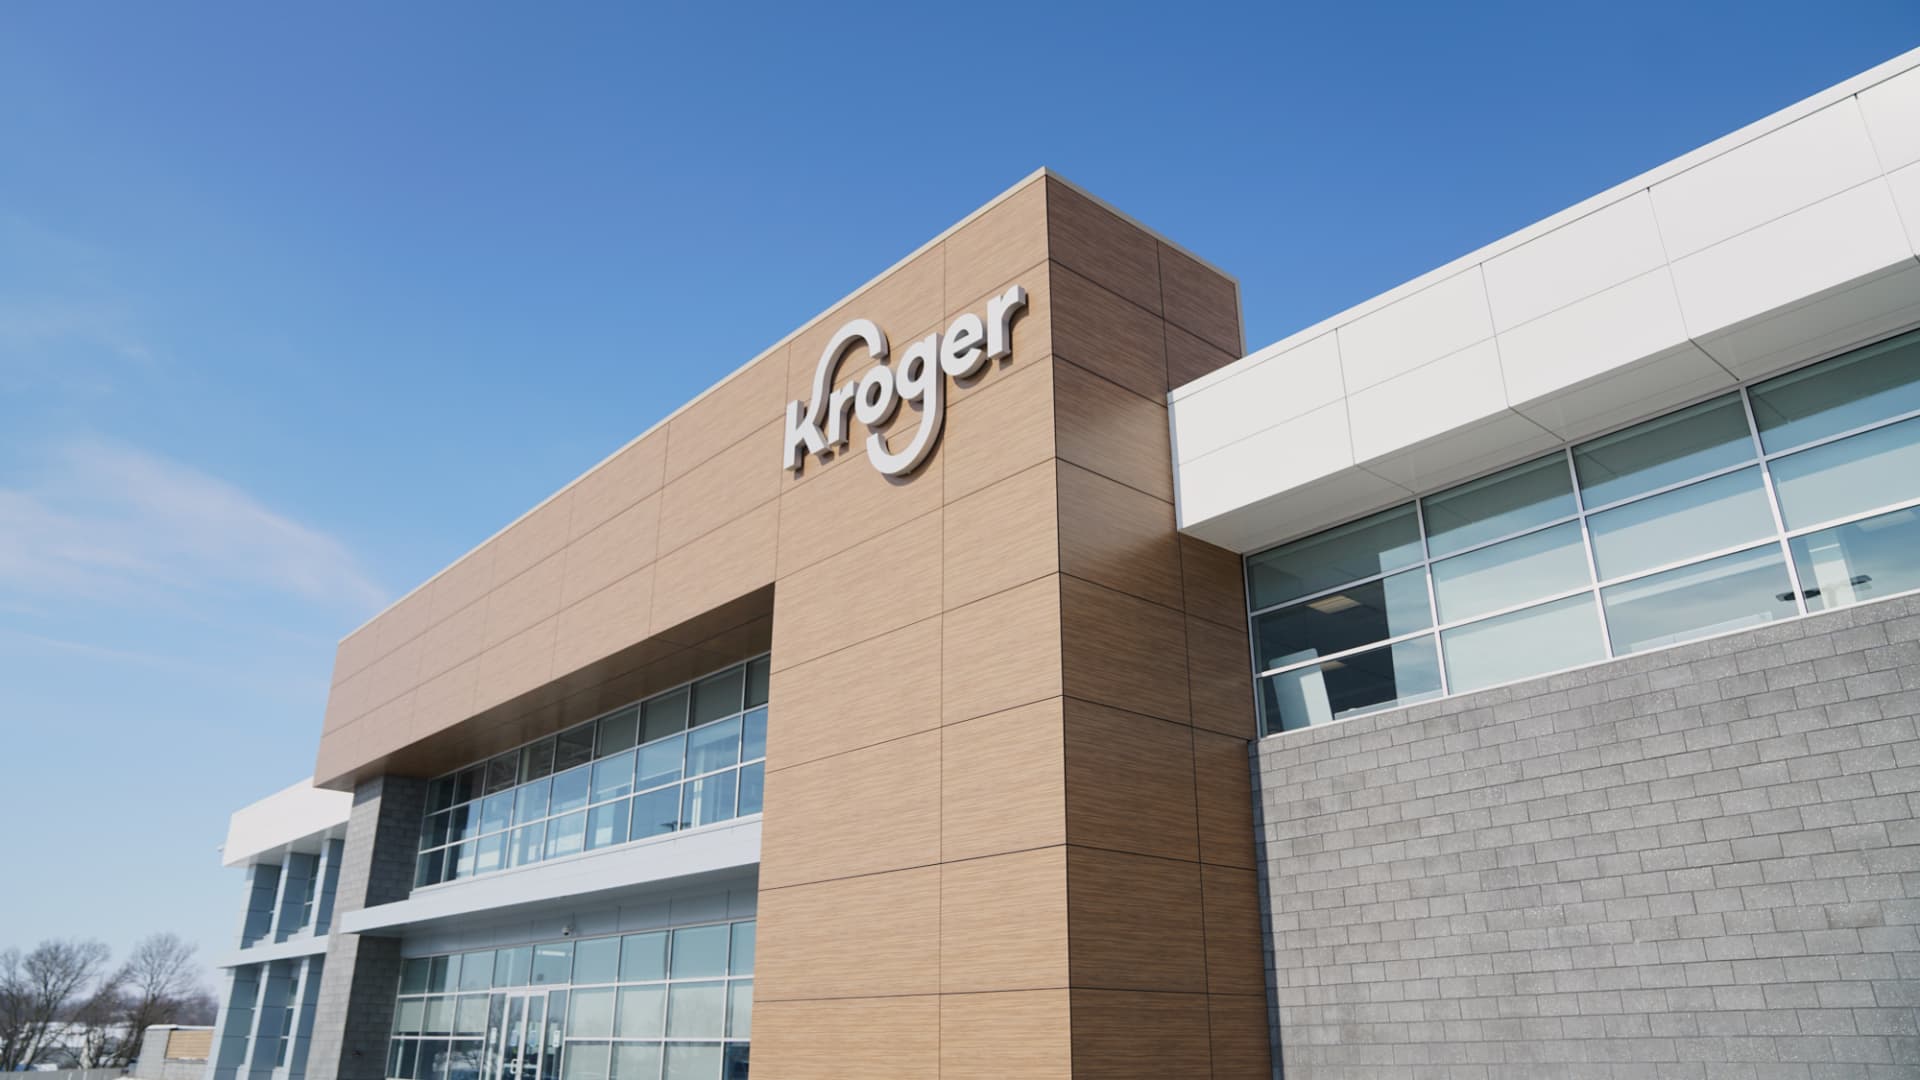 Kroger is opening automated warehouses around the country to build a larger and more profitable online grocery business.